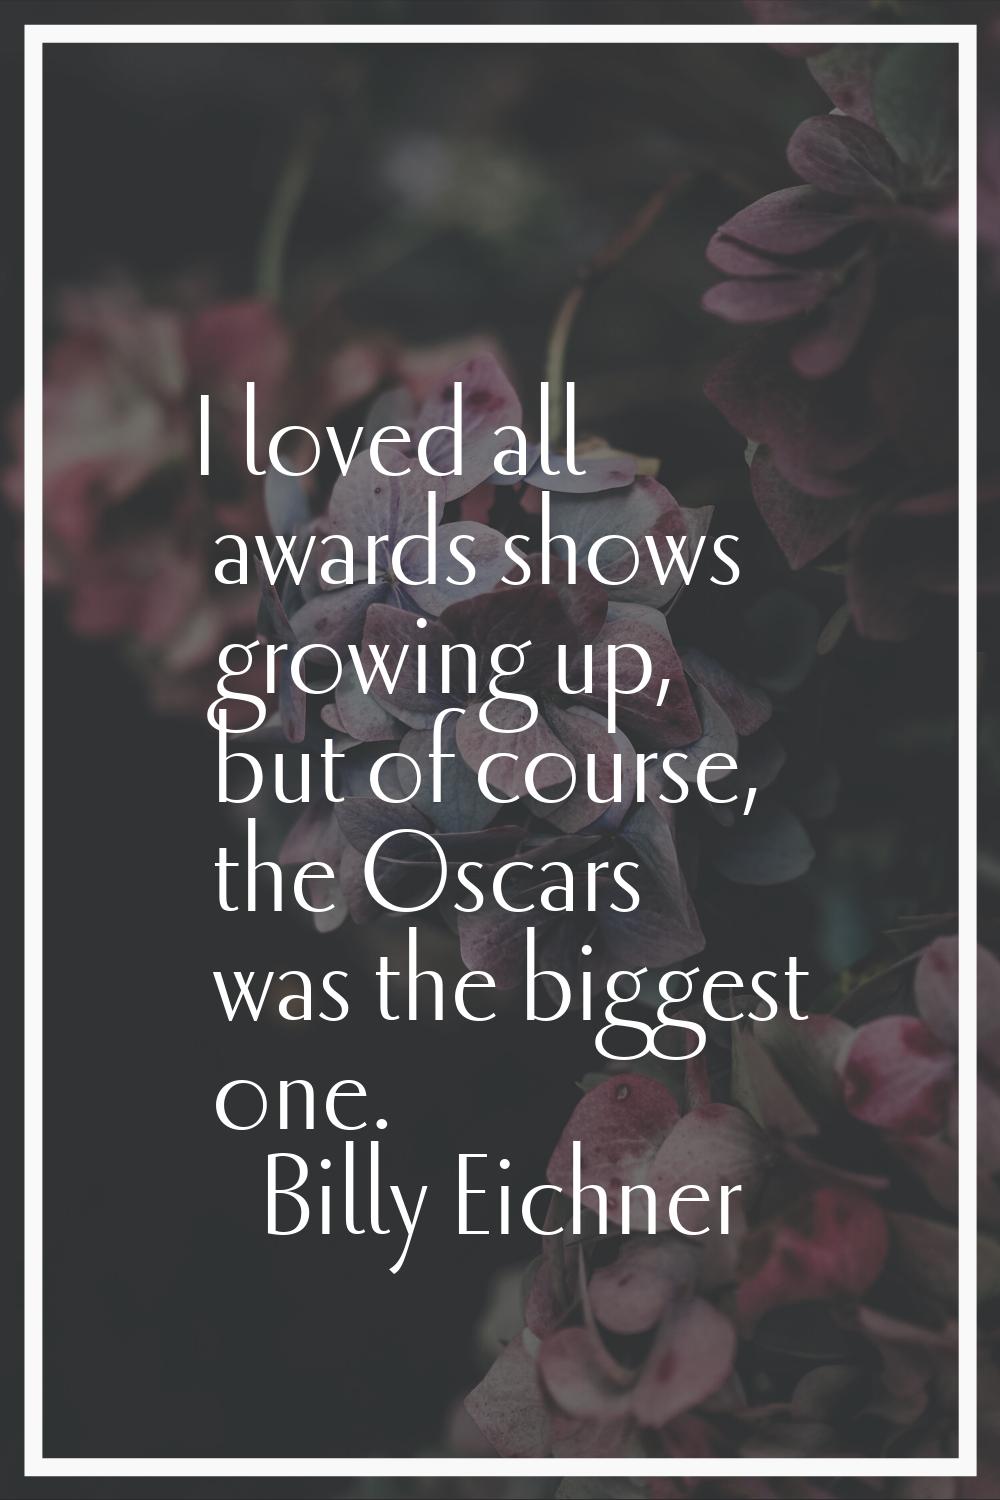 I loved all awards shows growing up, but of course, the Oscars was the biggest one.